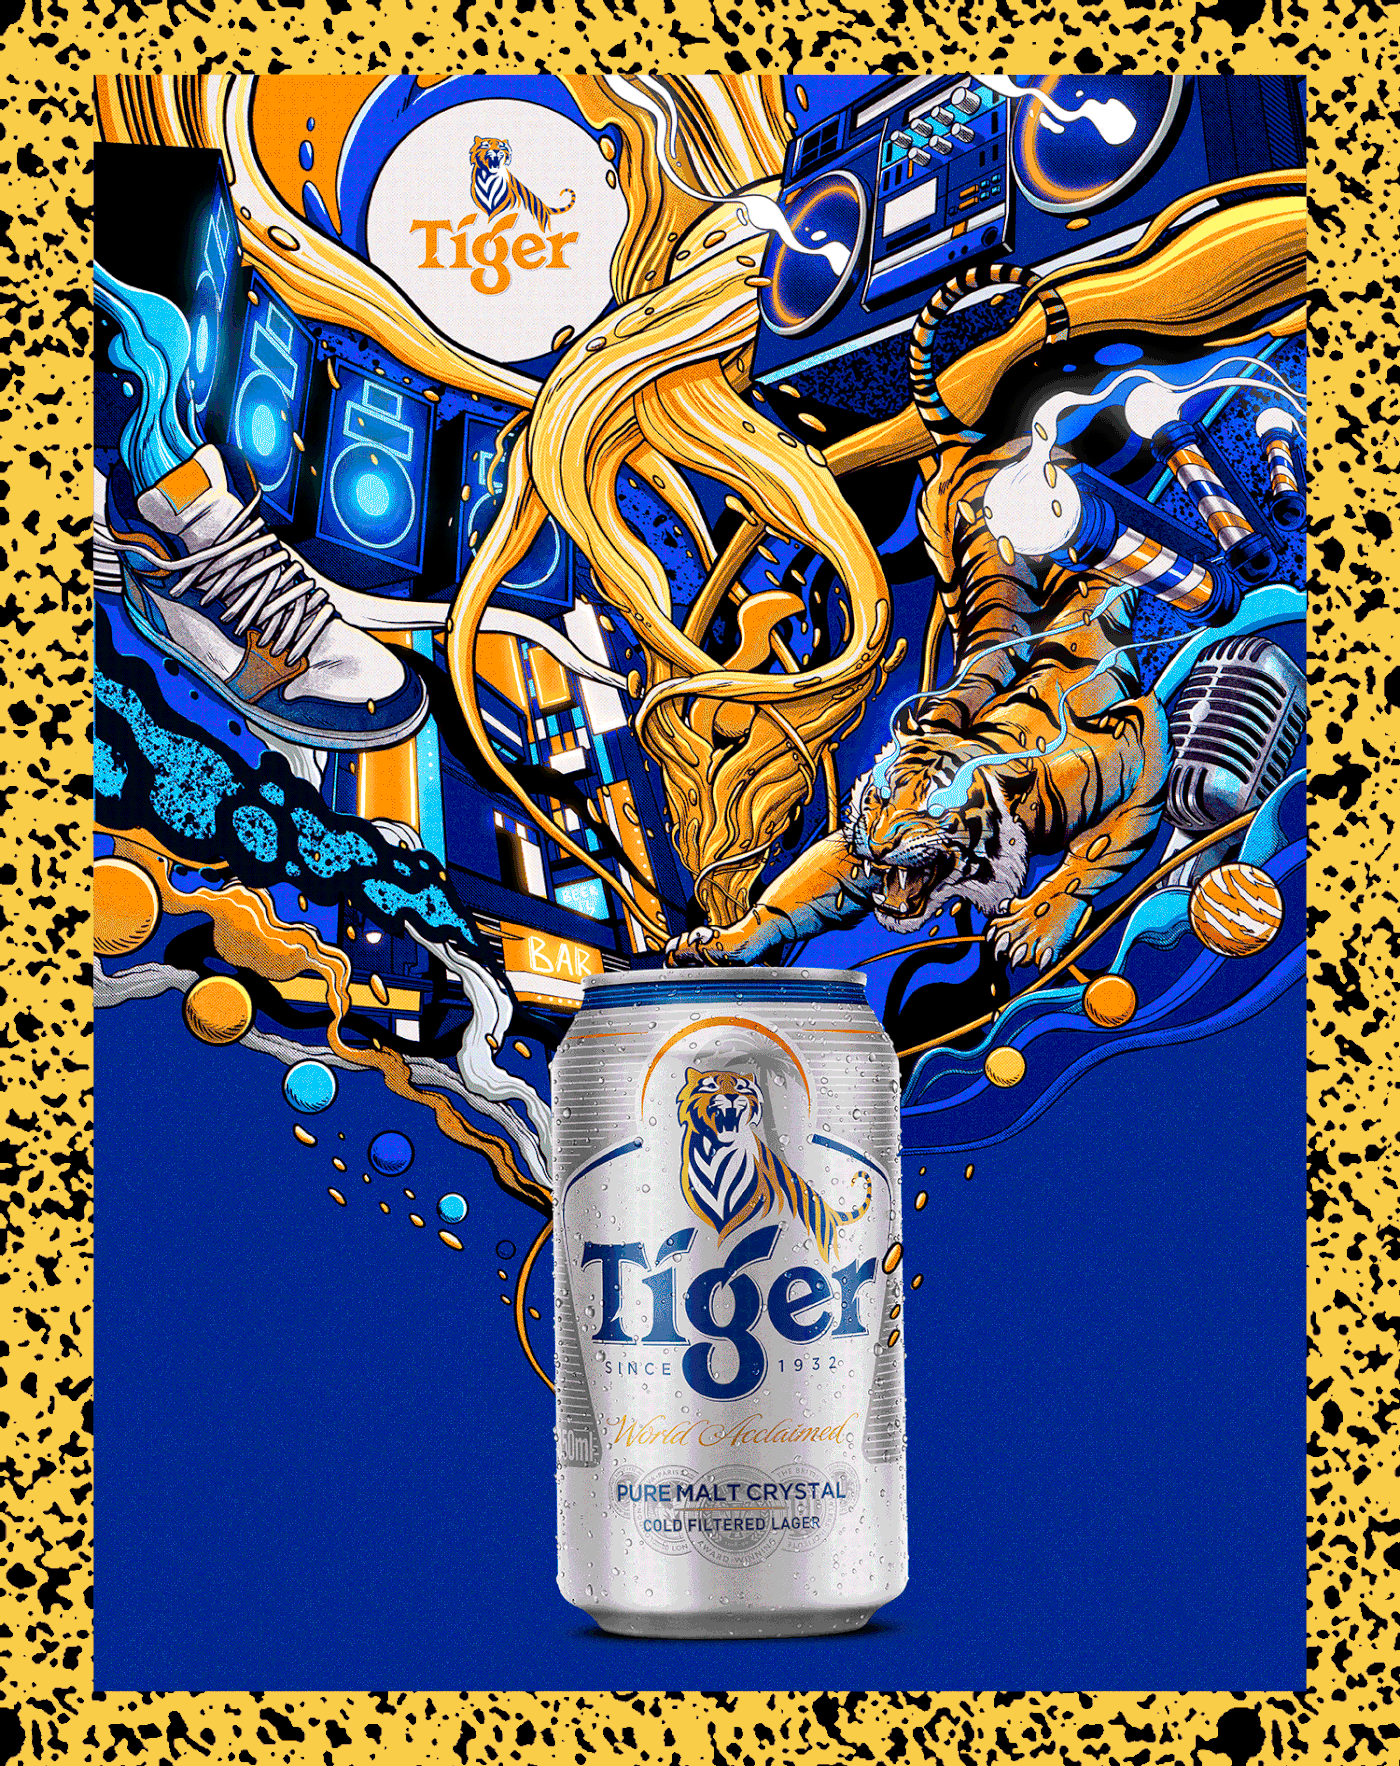 beer city energy flow movement music poster skateboard tiger wild